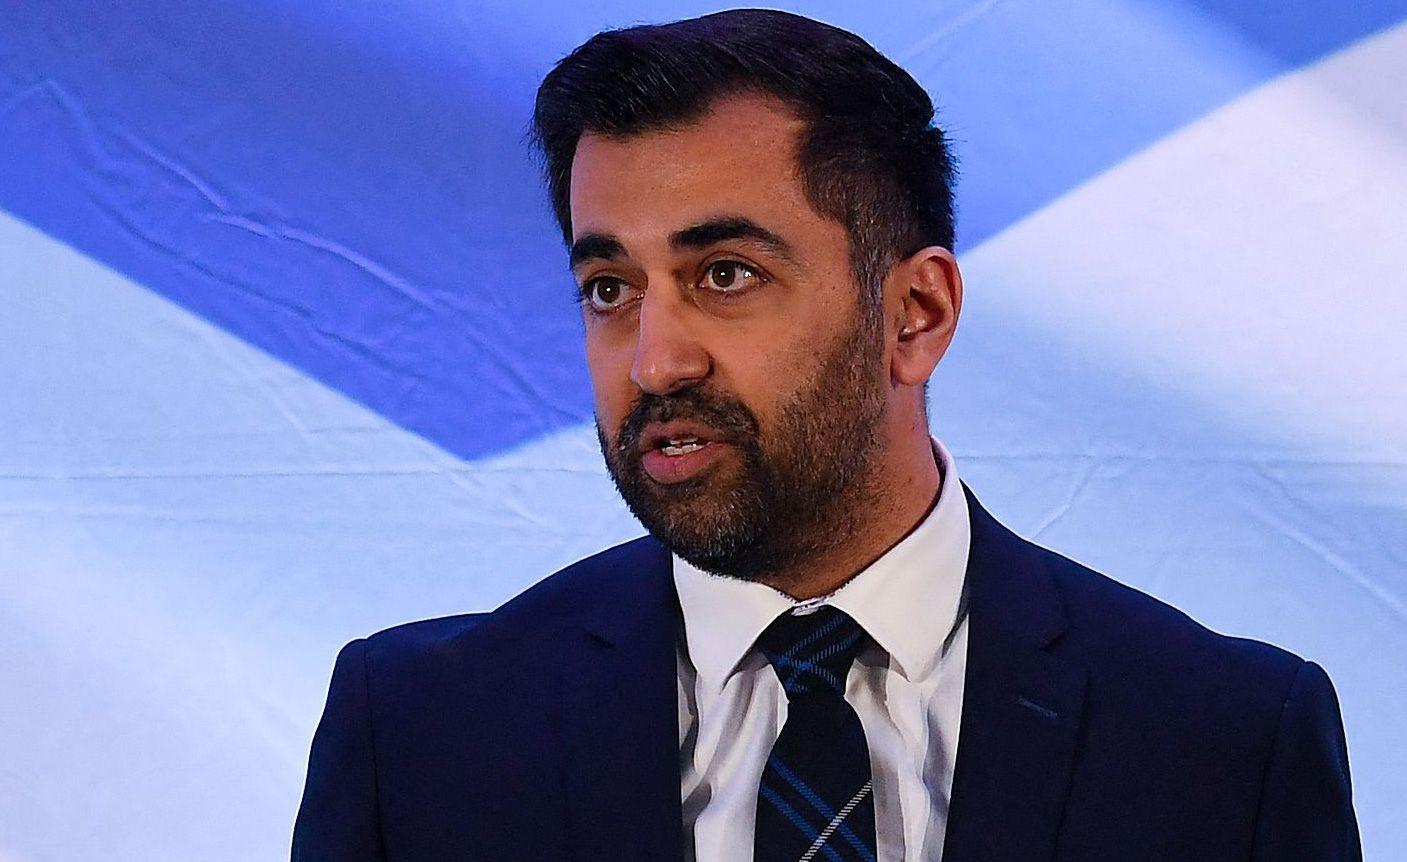 Yousaf considers quitting as Scotlands first minister